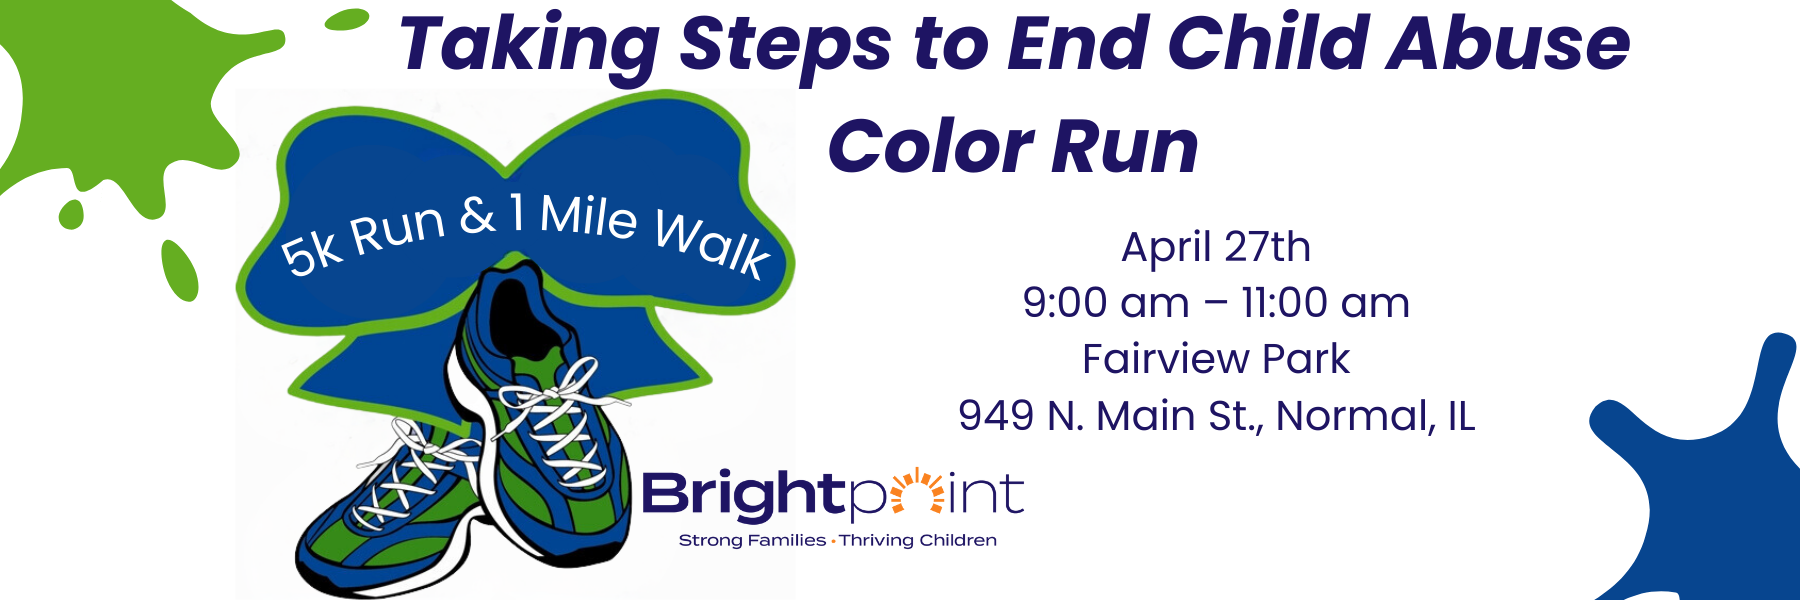 Taking Steps To End Child Abuse 5K Color Run/1 Mile walk